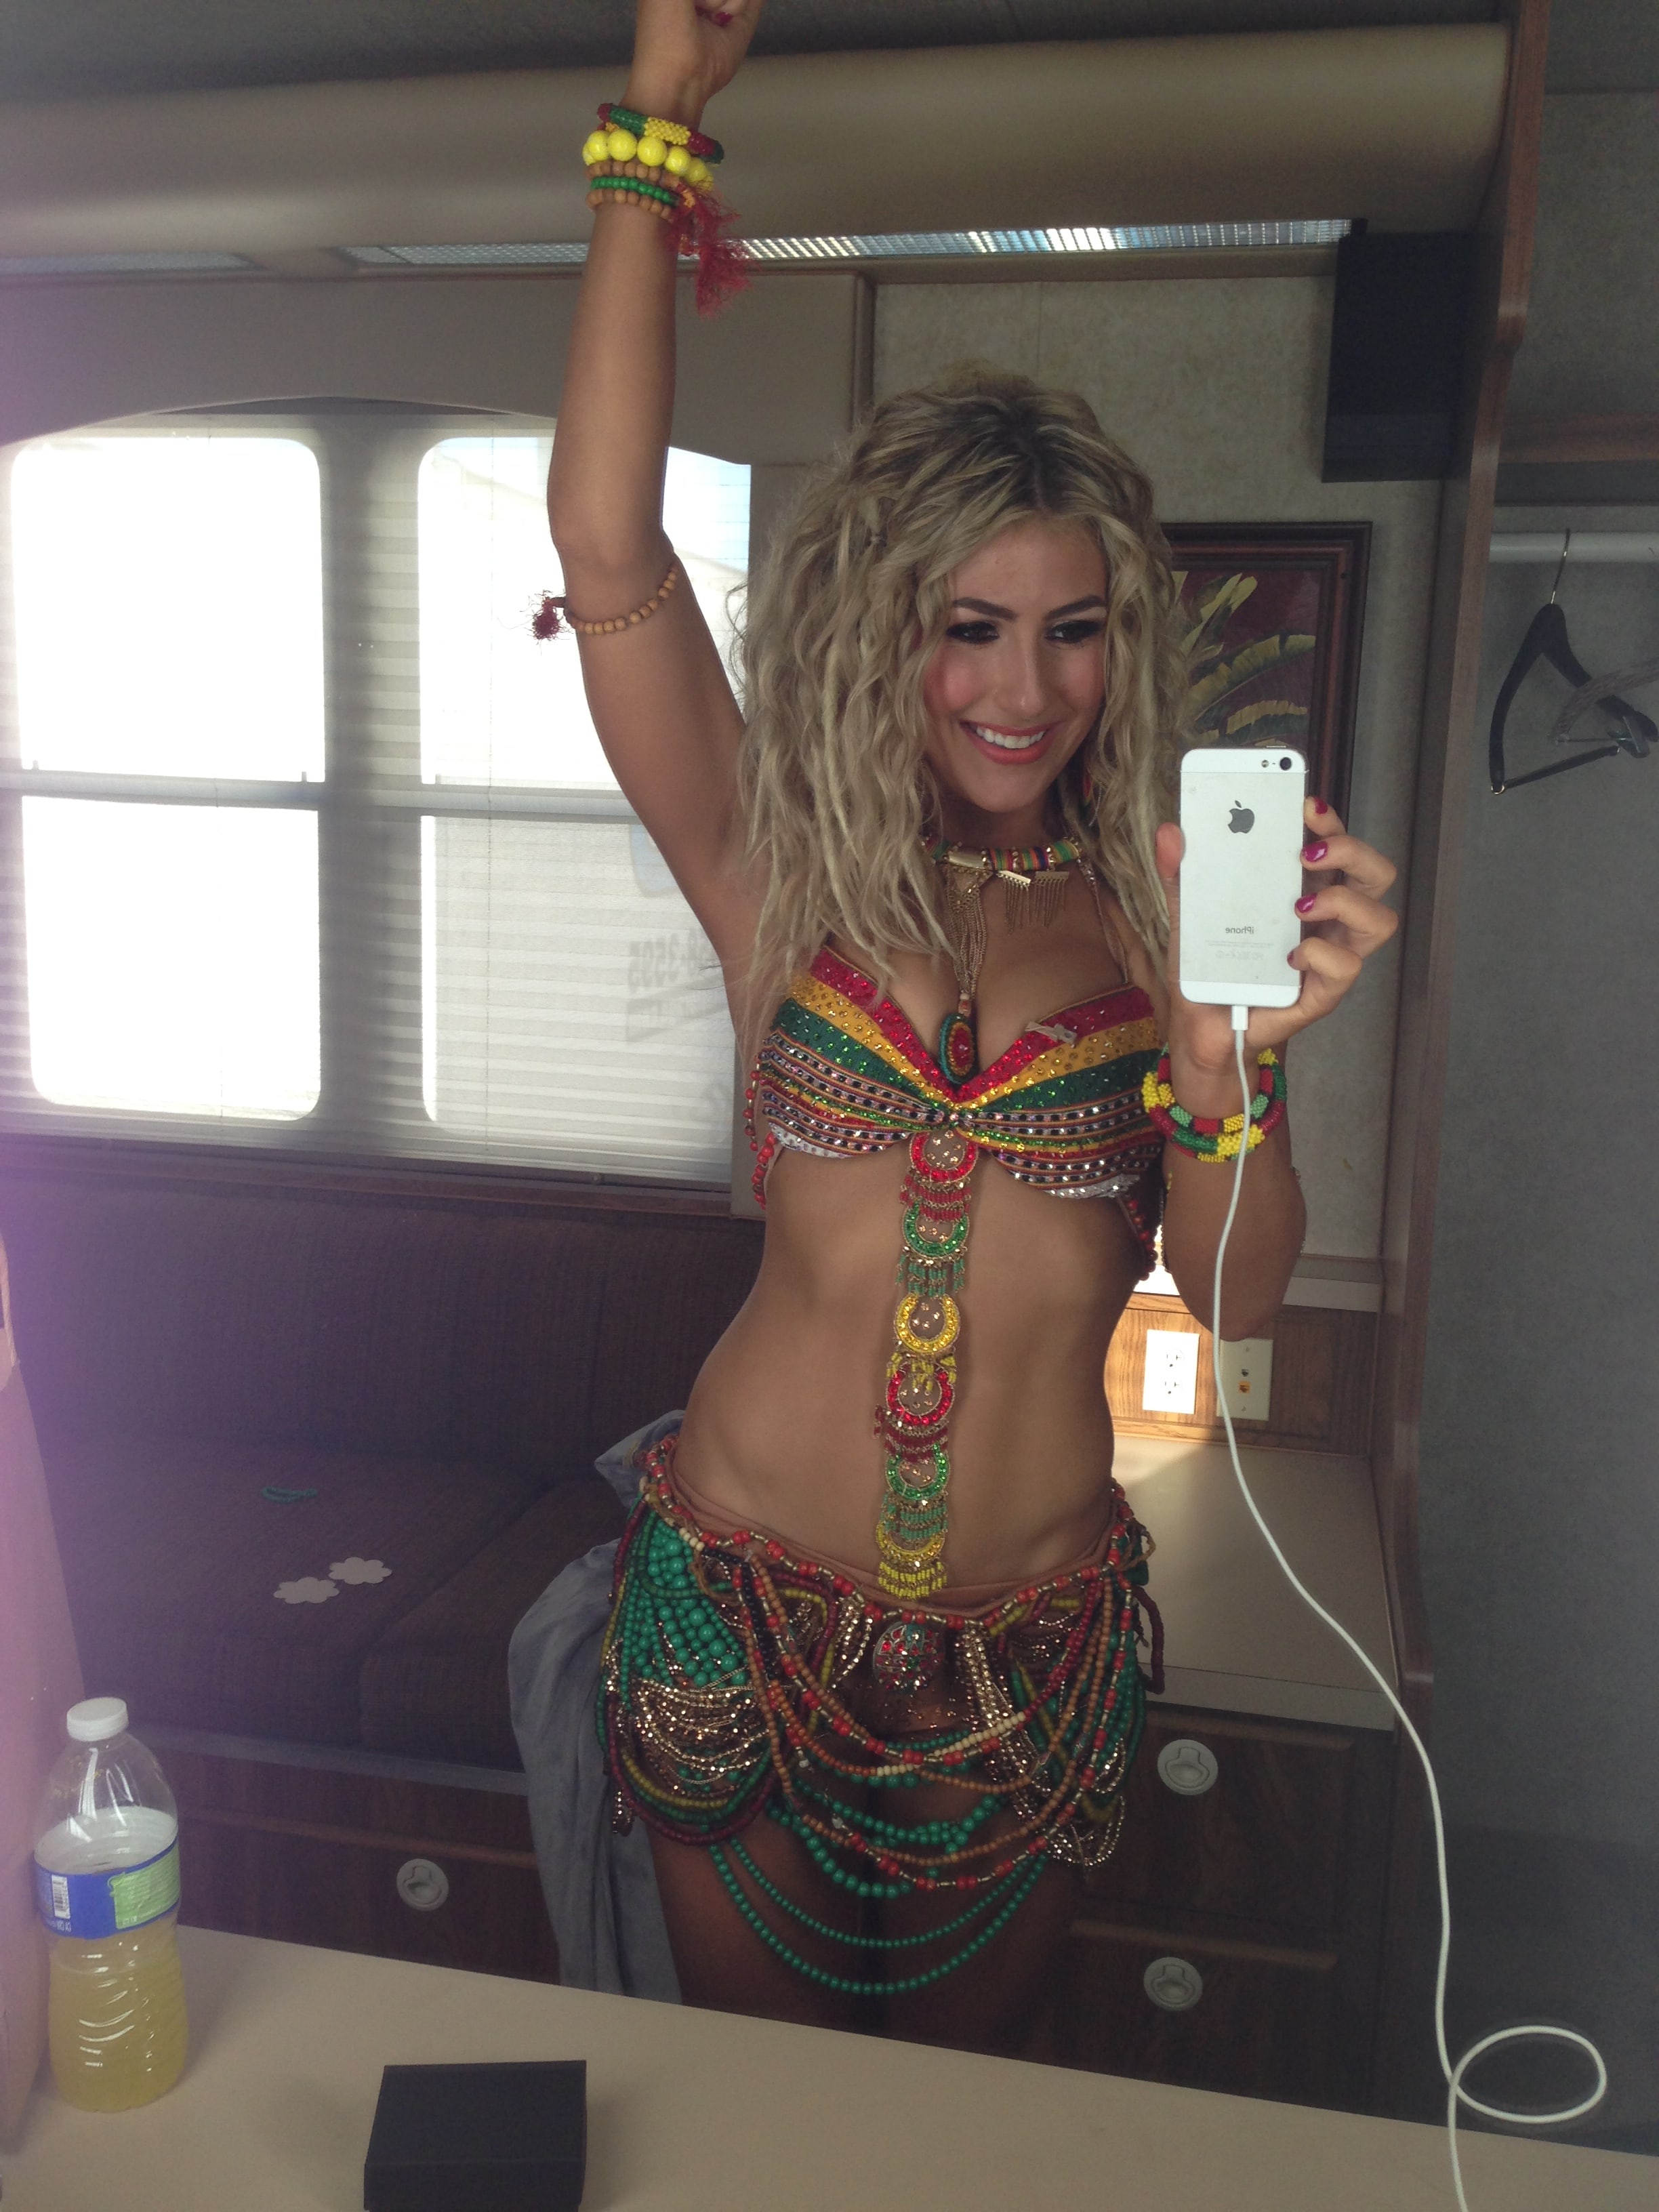 Dancing with the stars' emma slater leaks
 #79530690